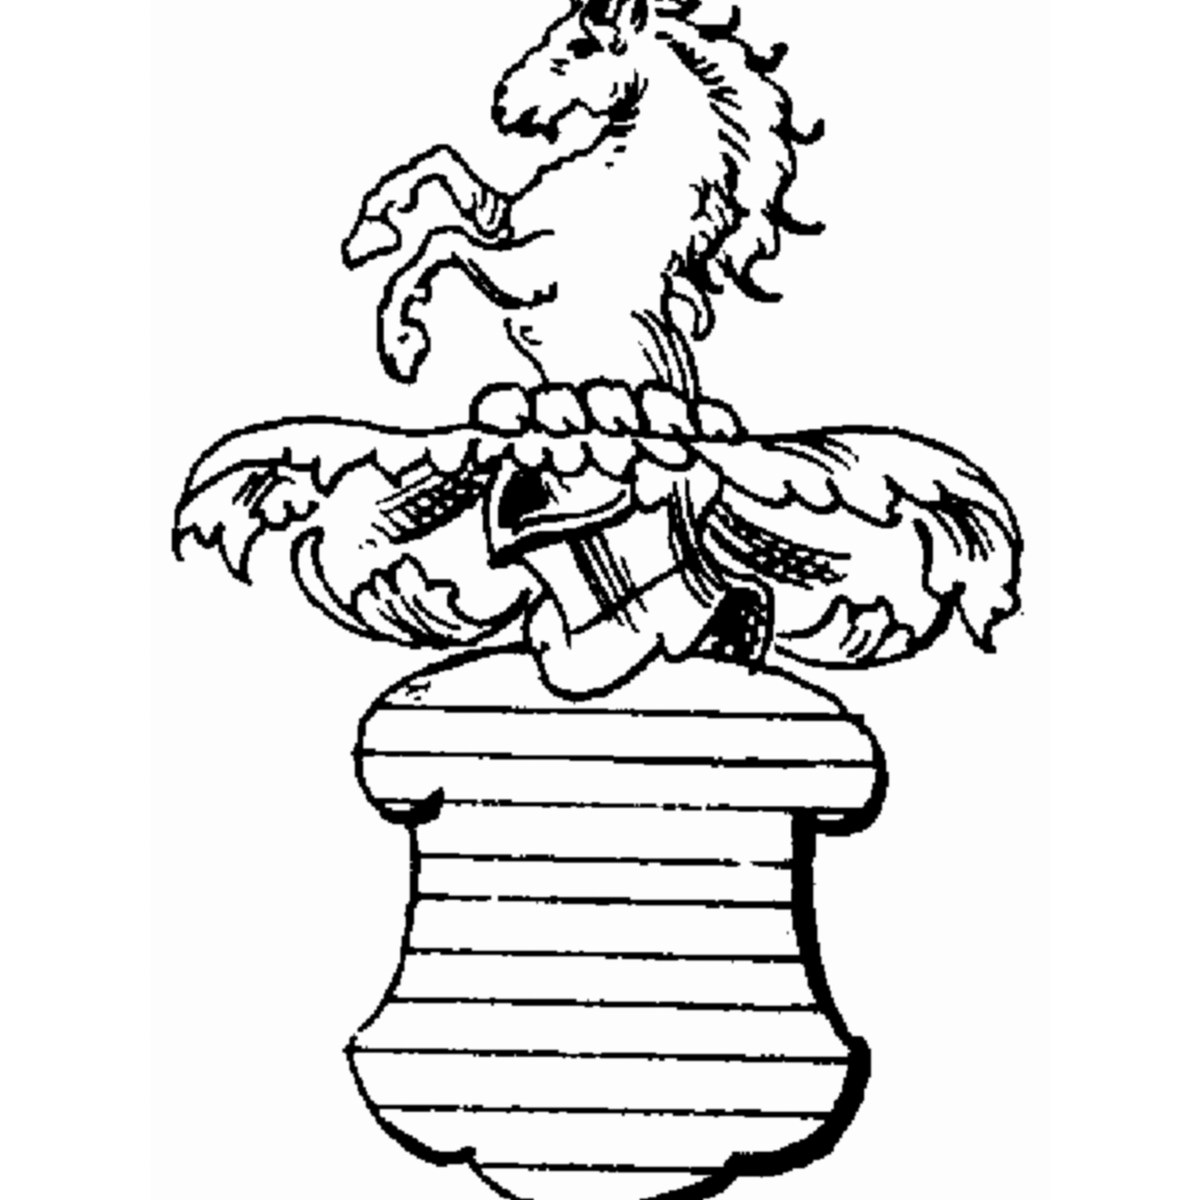 Coat of arms of family Mauger